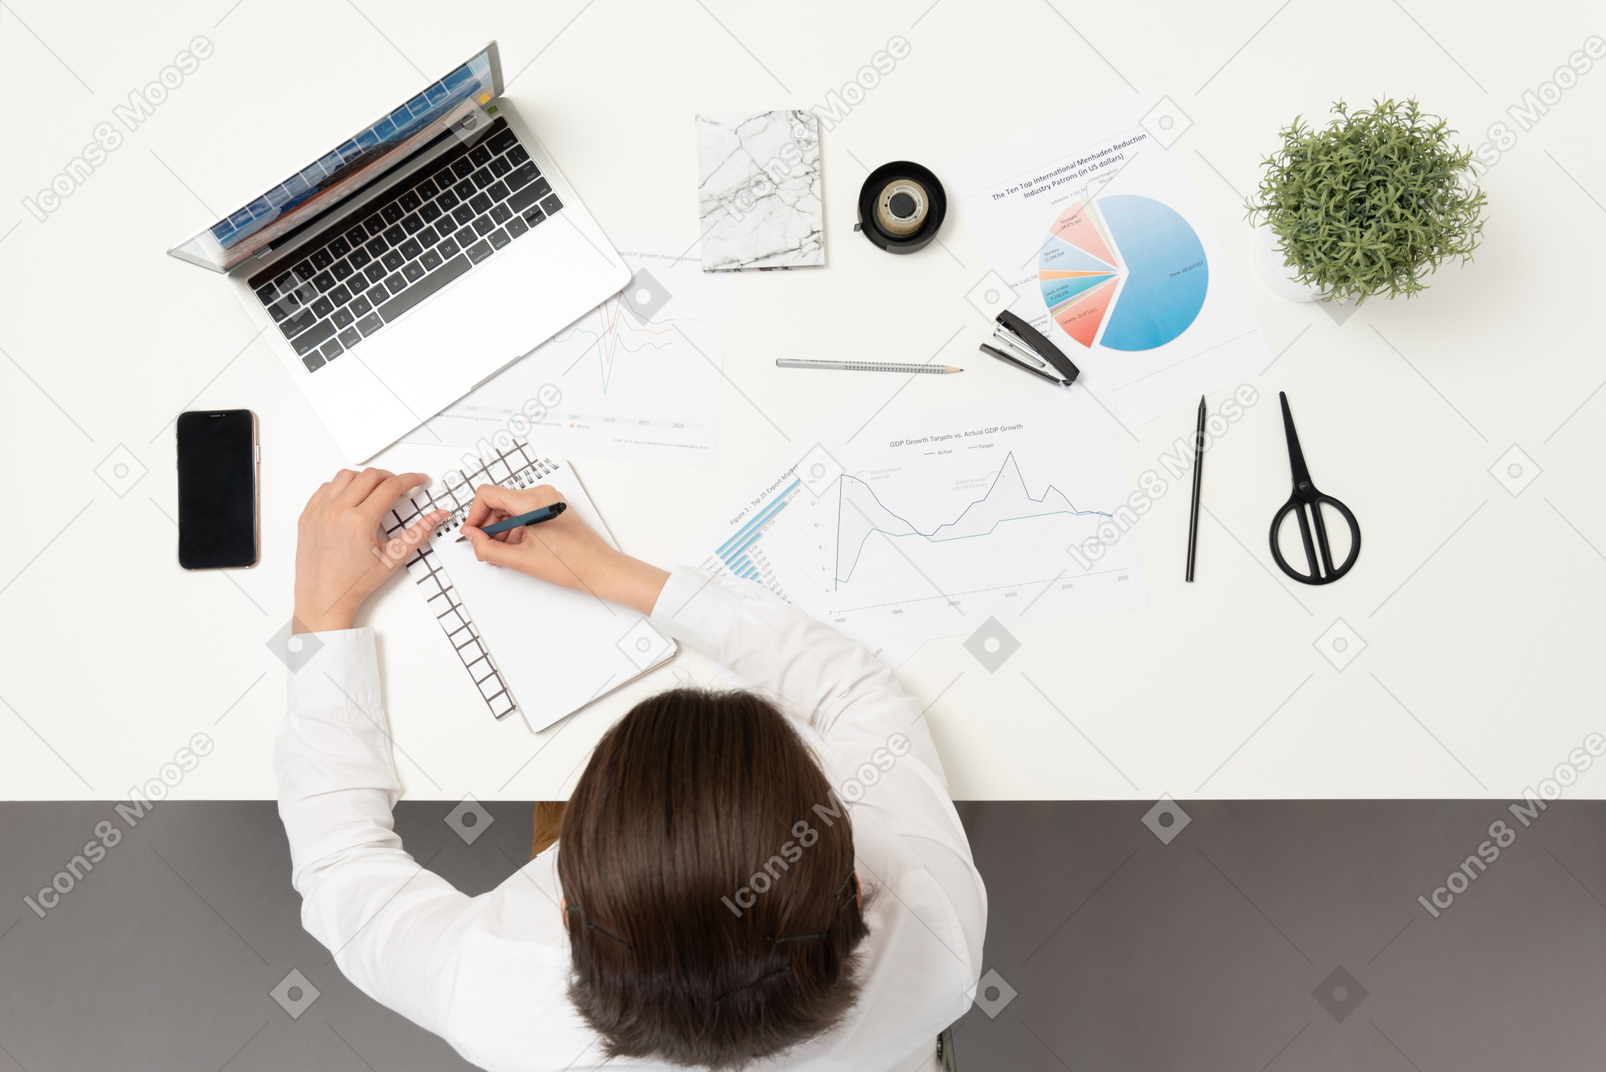 A female office worker making notes at the table